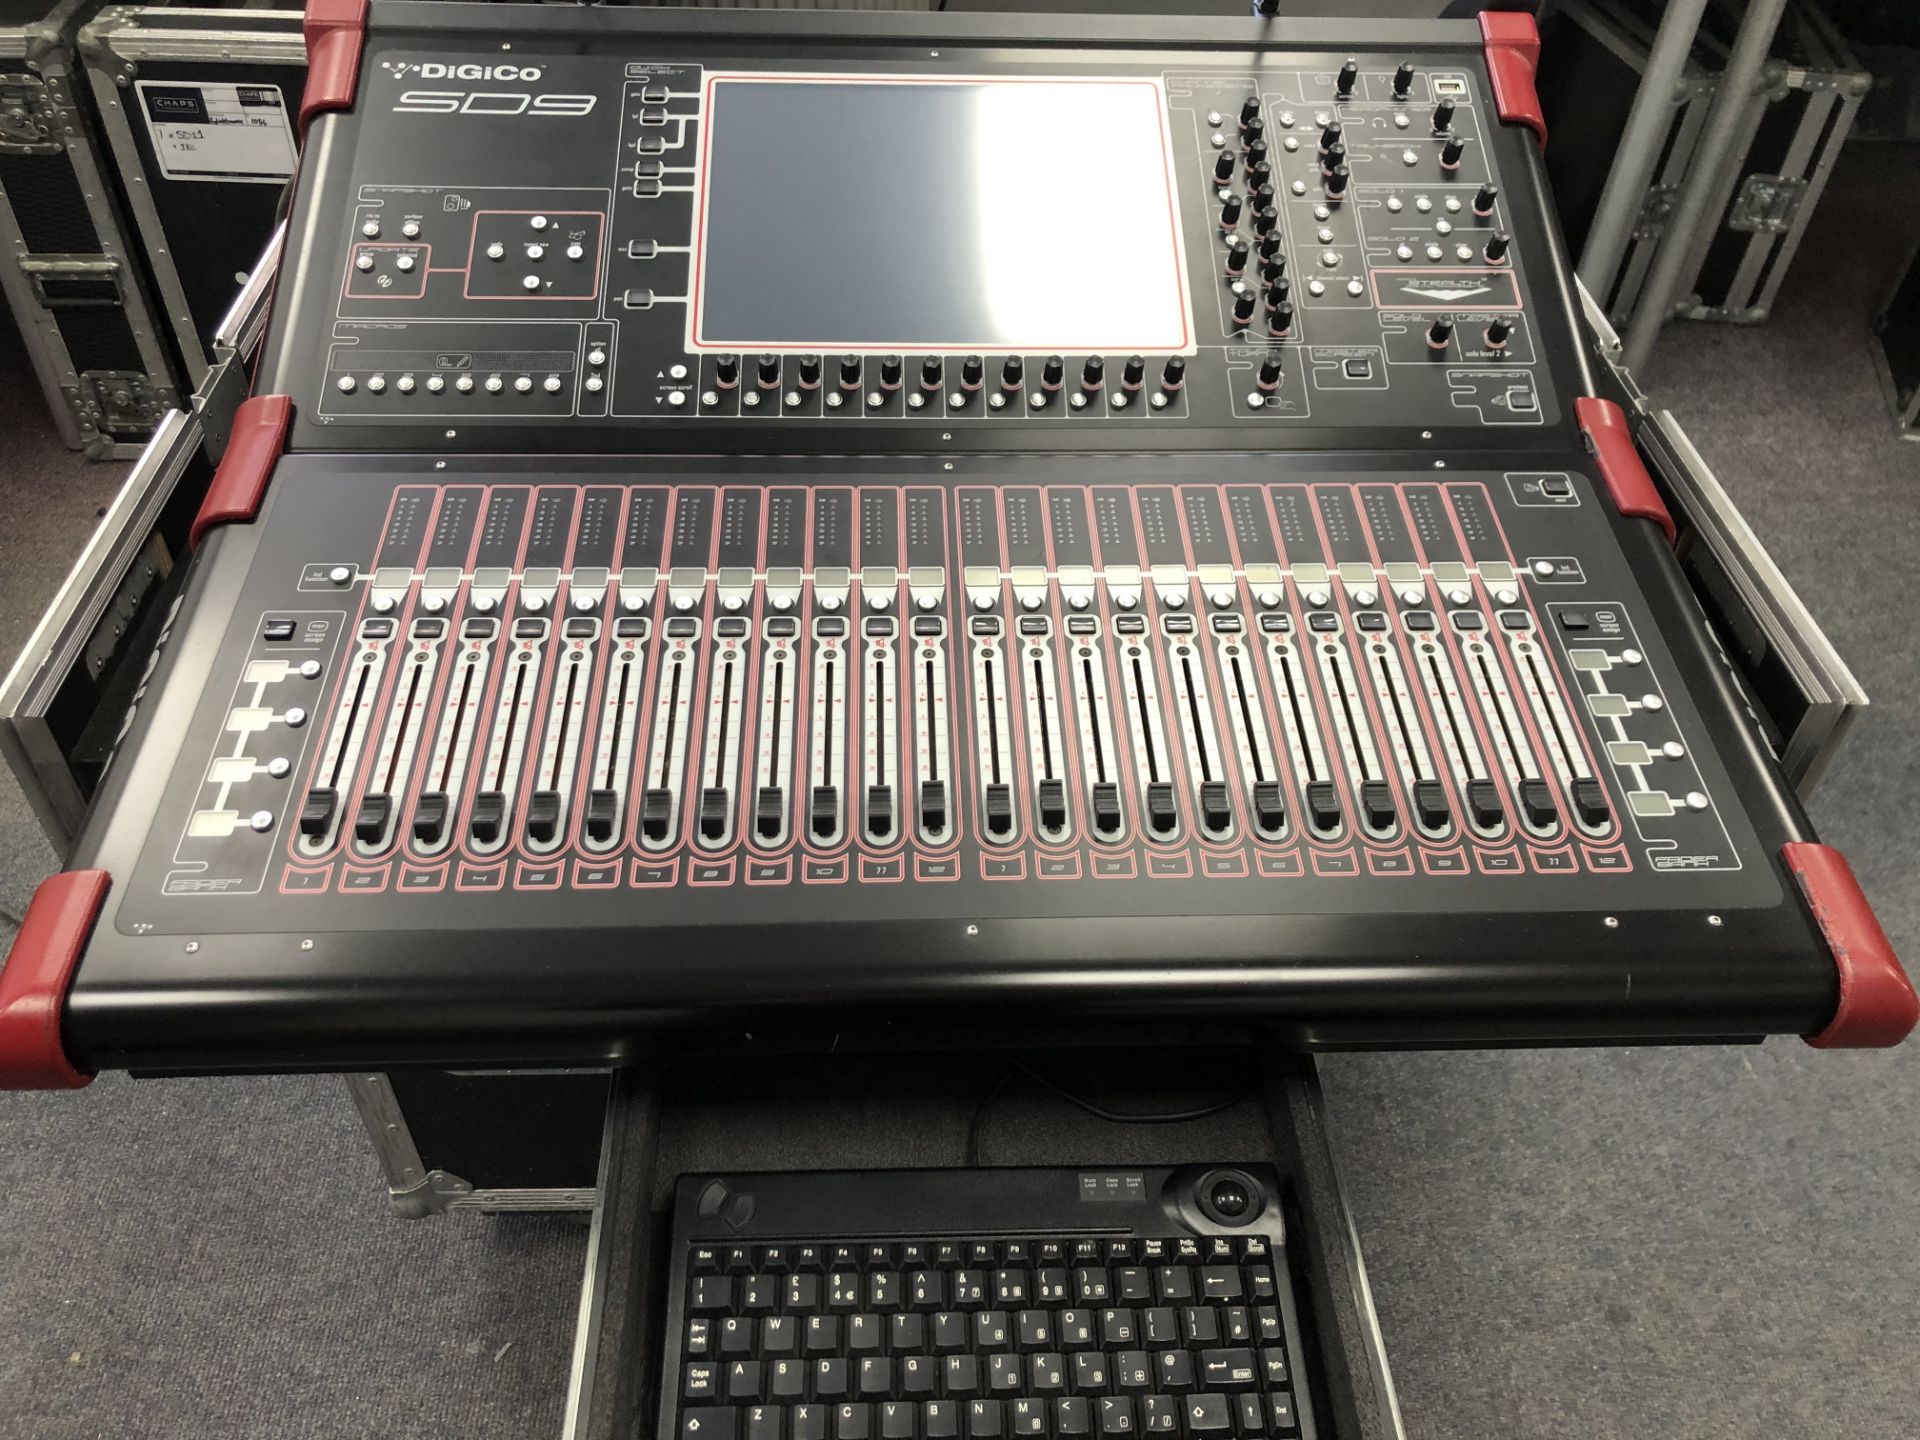 A Digico SD9 Sound Mixing Console, Core 2 Software with D-Rack 32 input, 16 output and 2 x 75m - Image 2 of 11